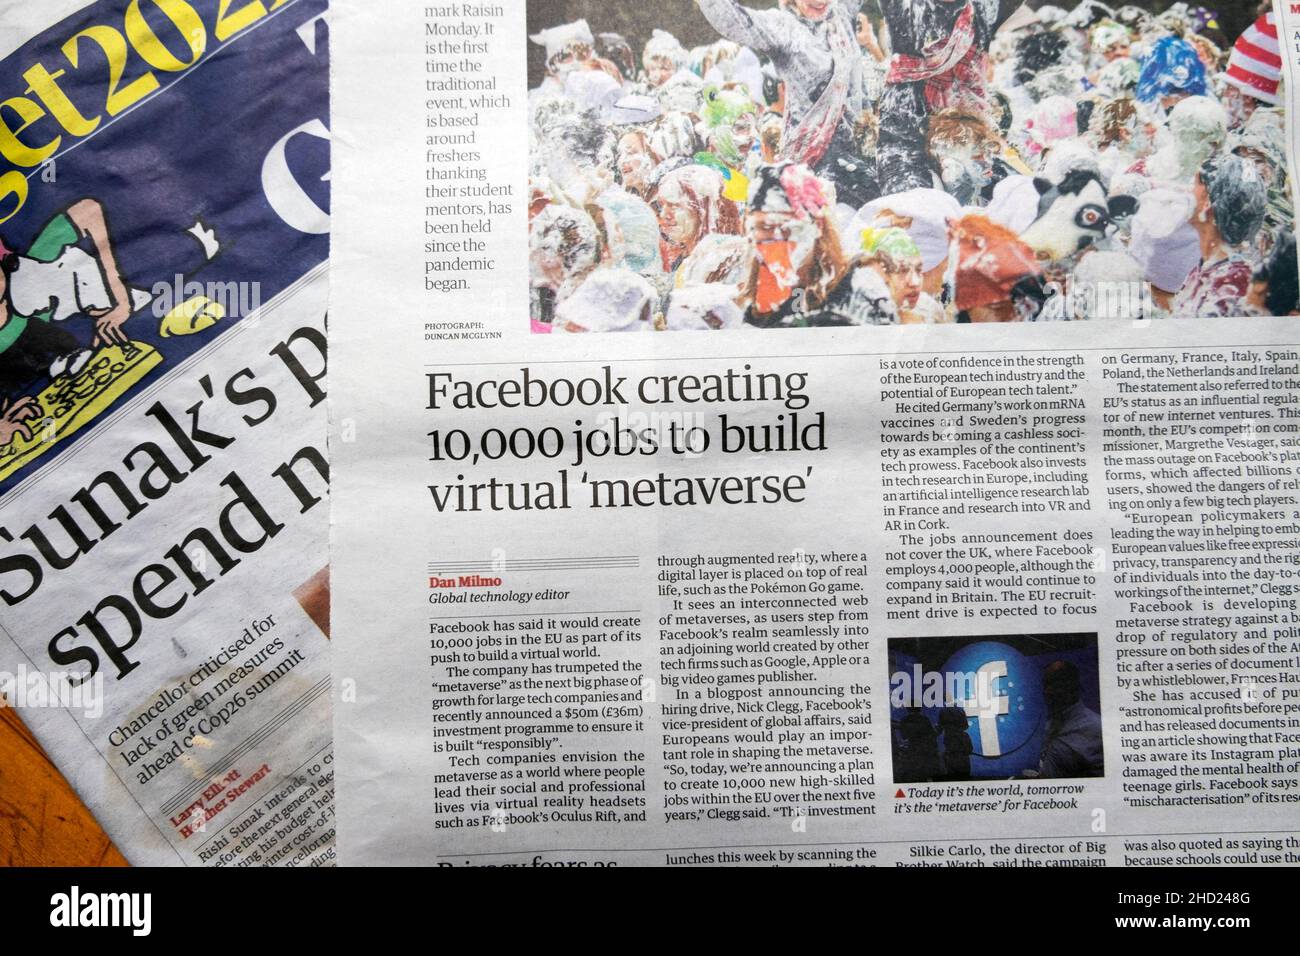 "Facebook creating 10,000 jobs to build virtual 'metaverse' " Guardian newspaper headline Facebook article clipping on 18 October 2021 in London UK Stock Photo